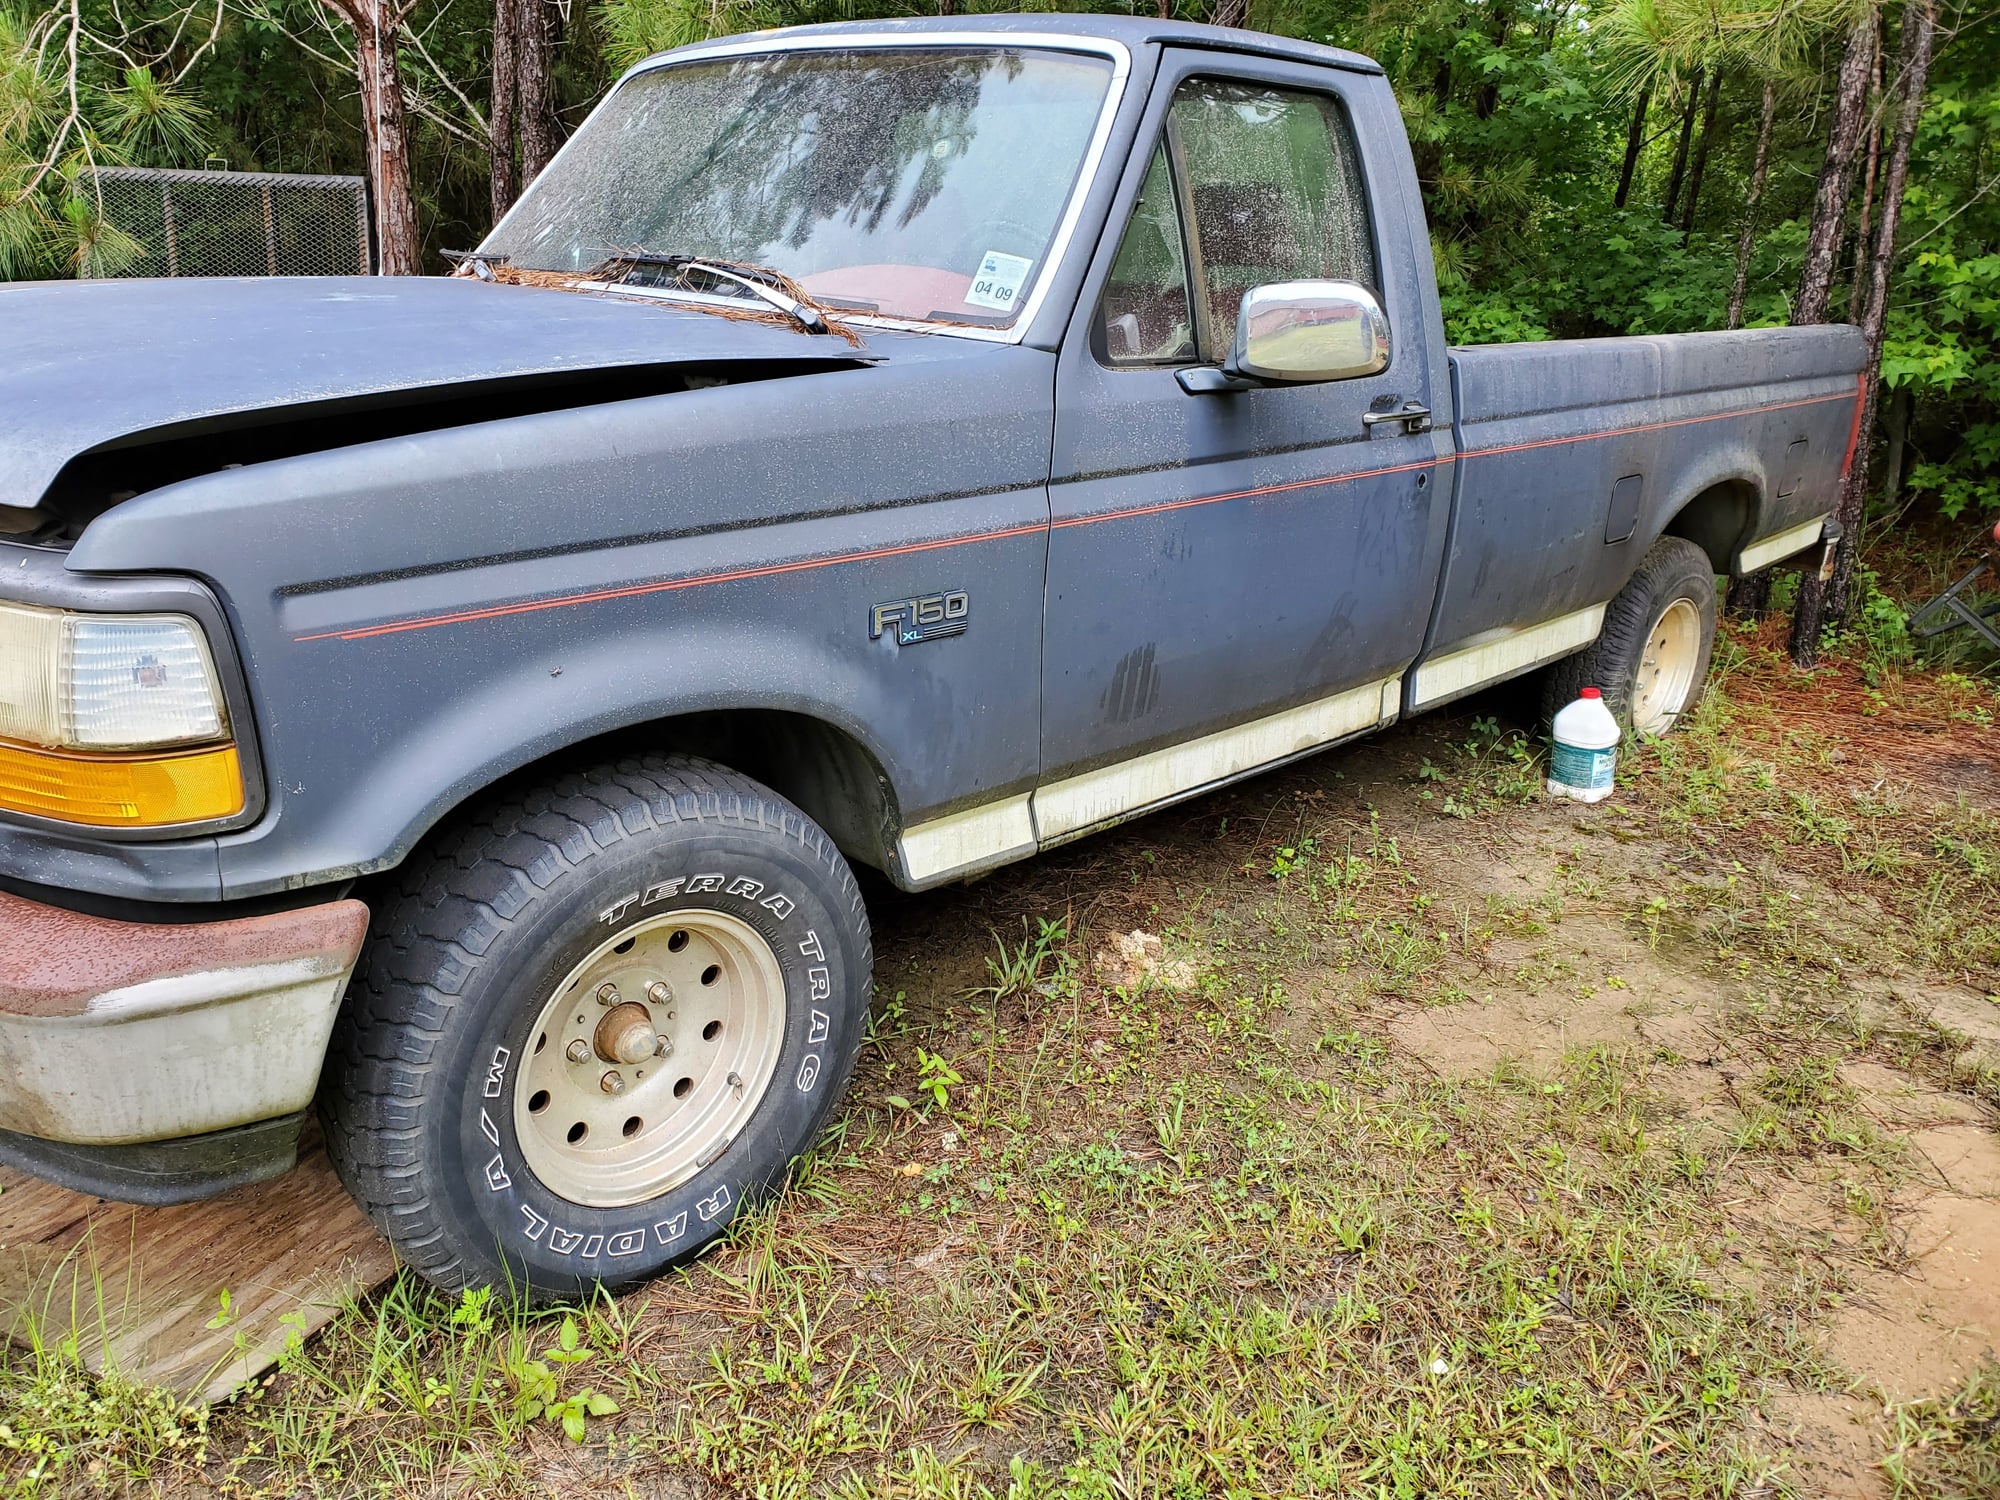 1993 Ford F-150 - Parting out in Louisiana- 1993 f150 300/5spd long bed - Leesville, LA 71446, United States